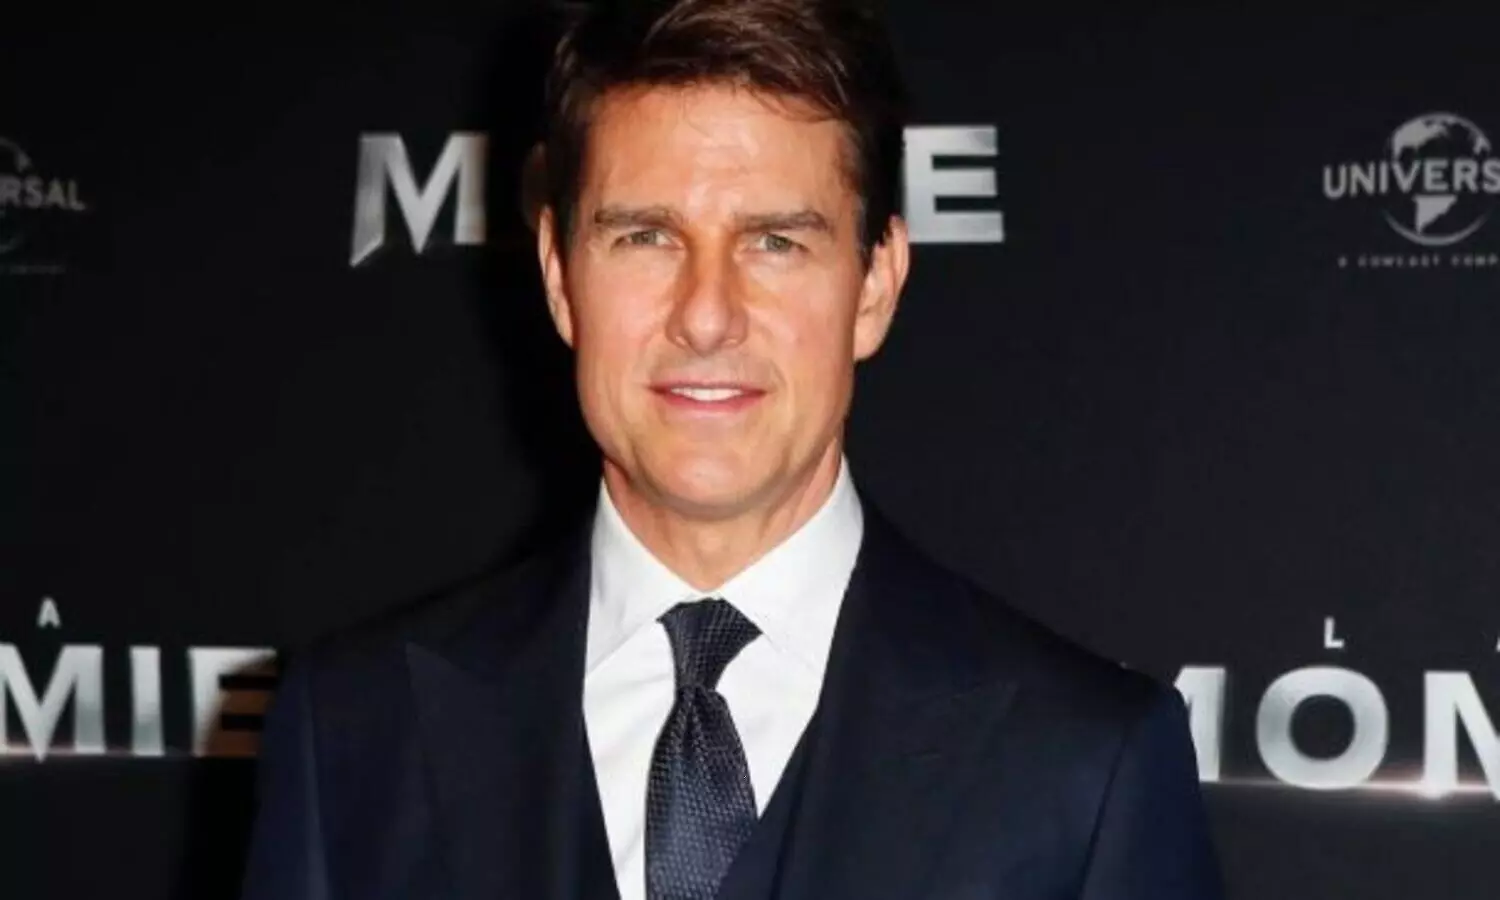 hollywood actor Tom Cruise